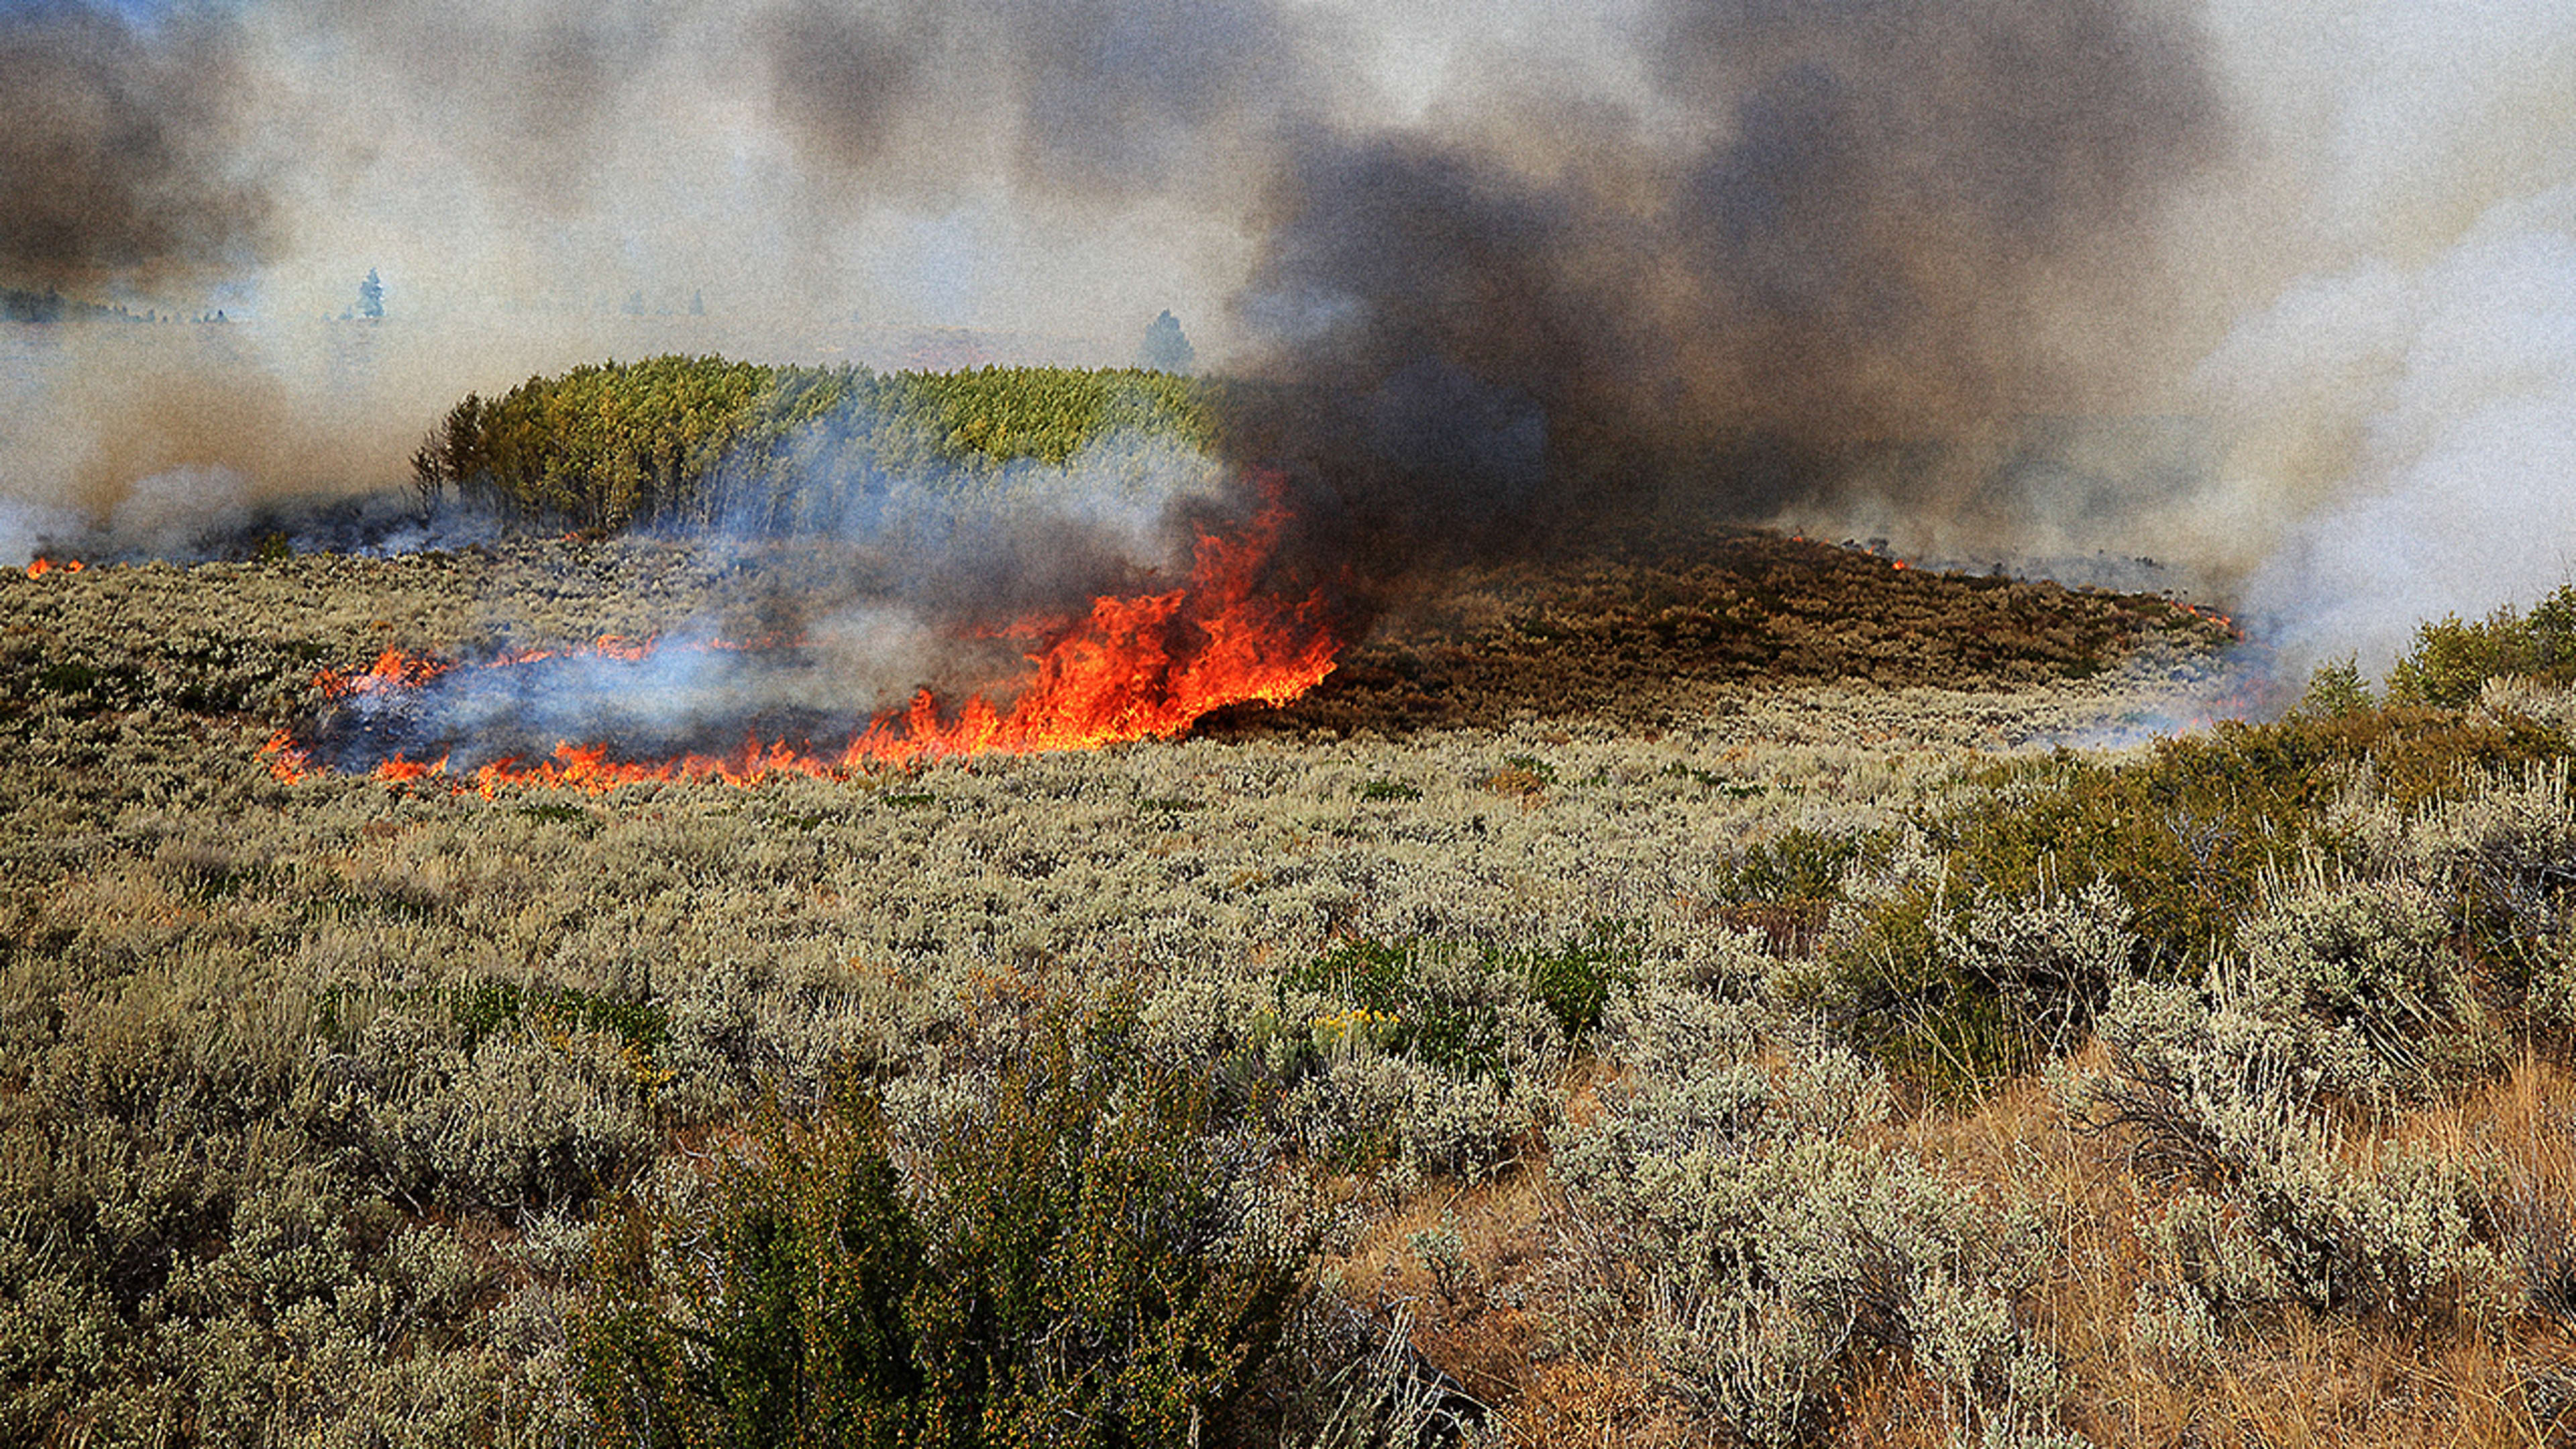 This new gel prevents plants from burning to stop wildfires